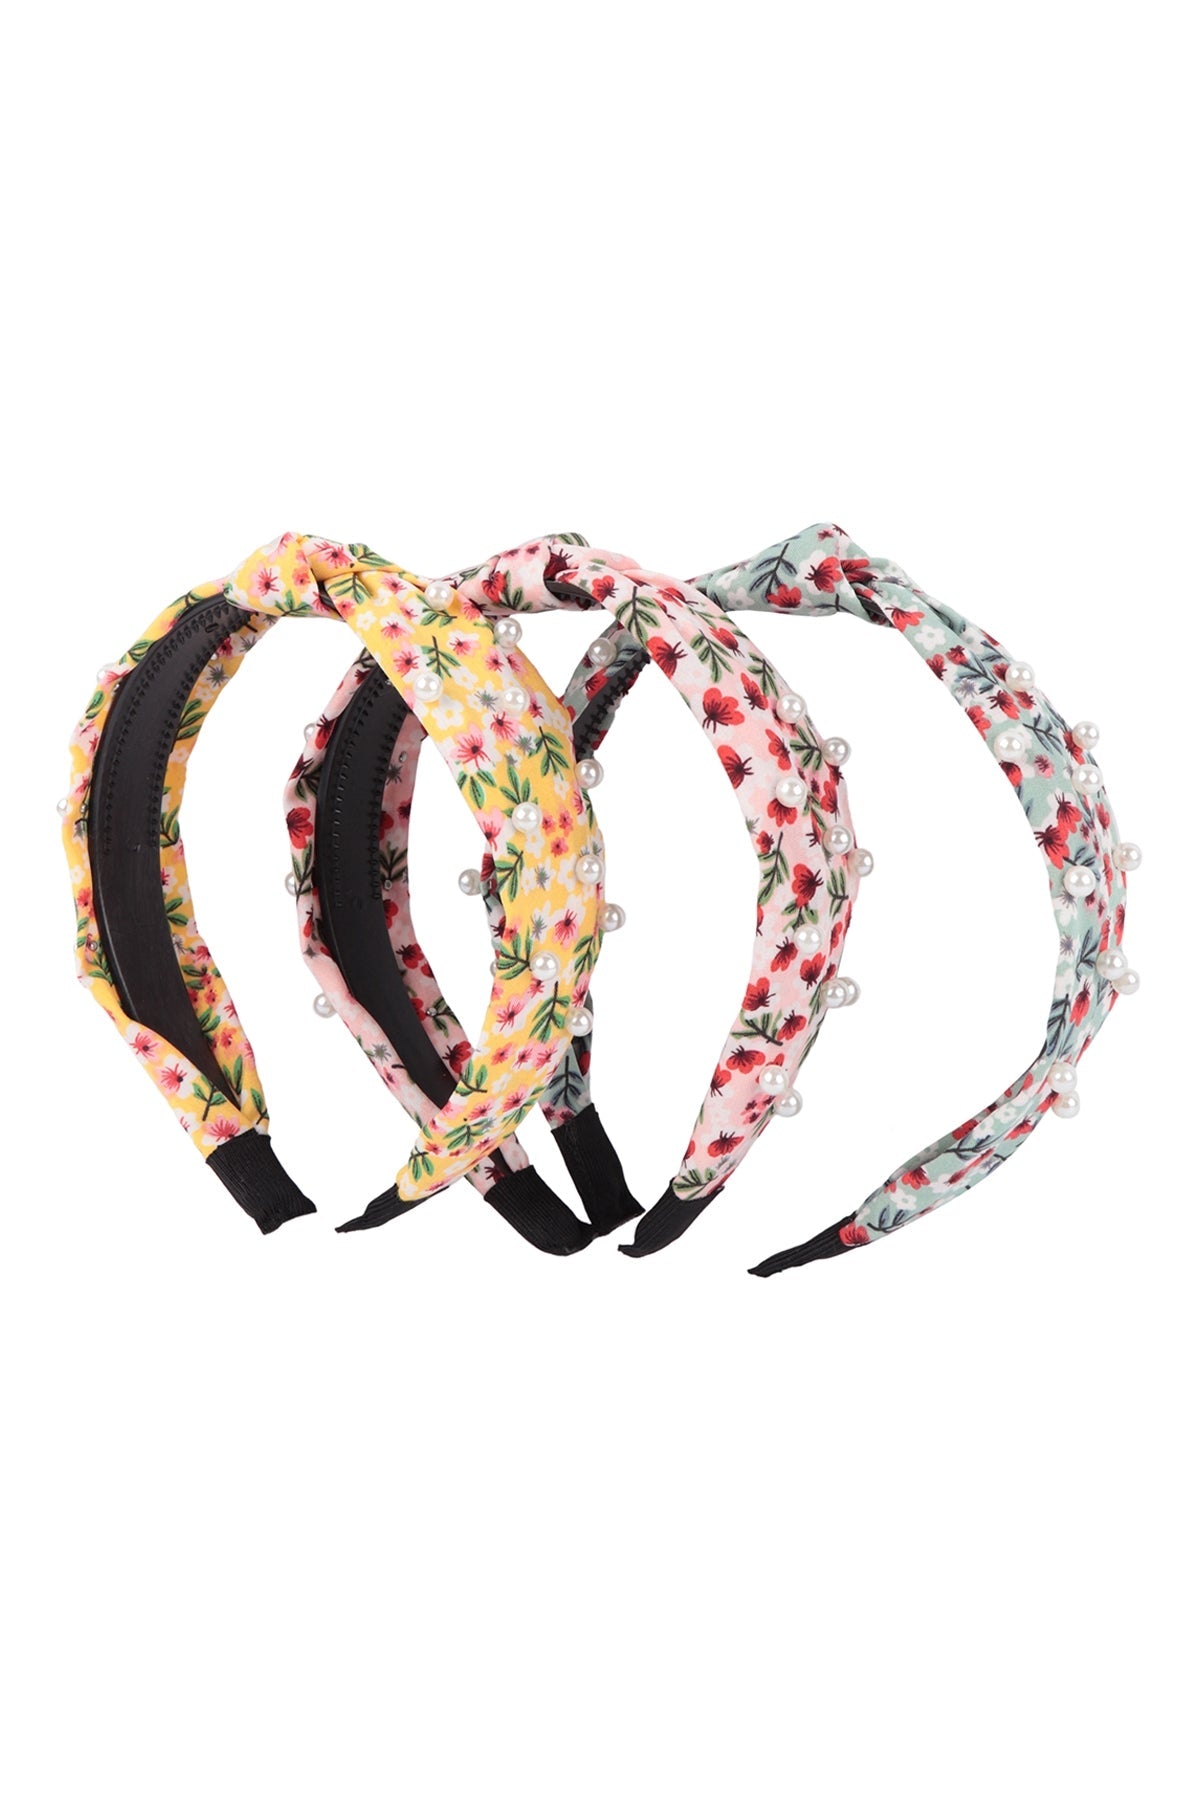 PEAR FLORAL PRINT KNOTTED HEADBAND HAIR ACCESSORIES/12PCS